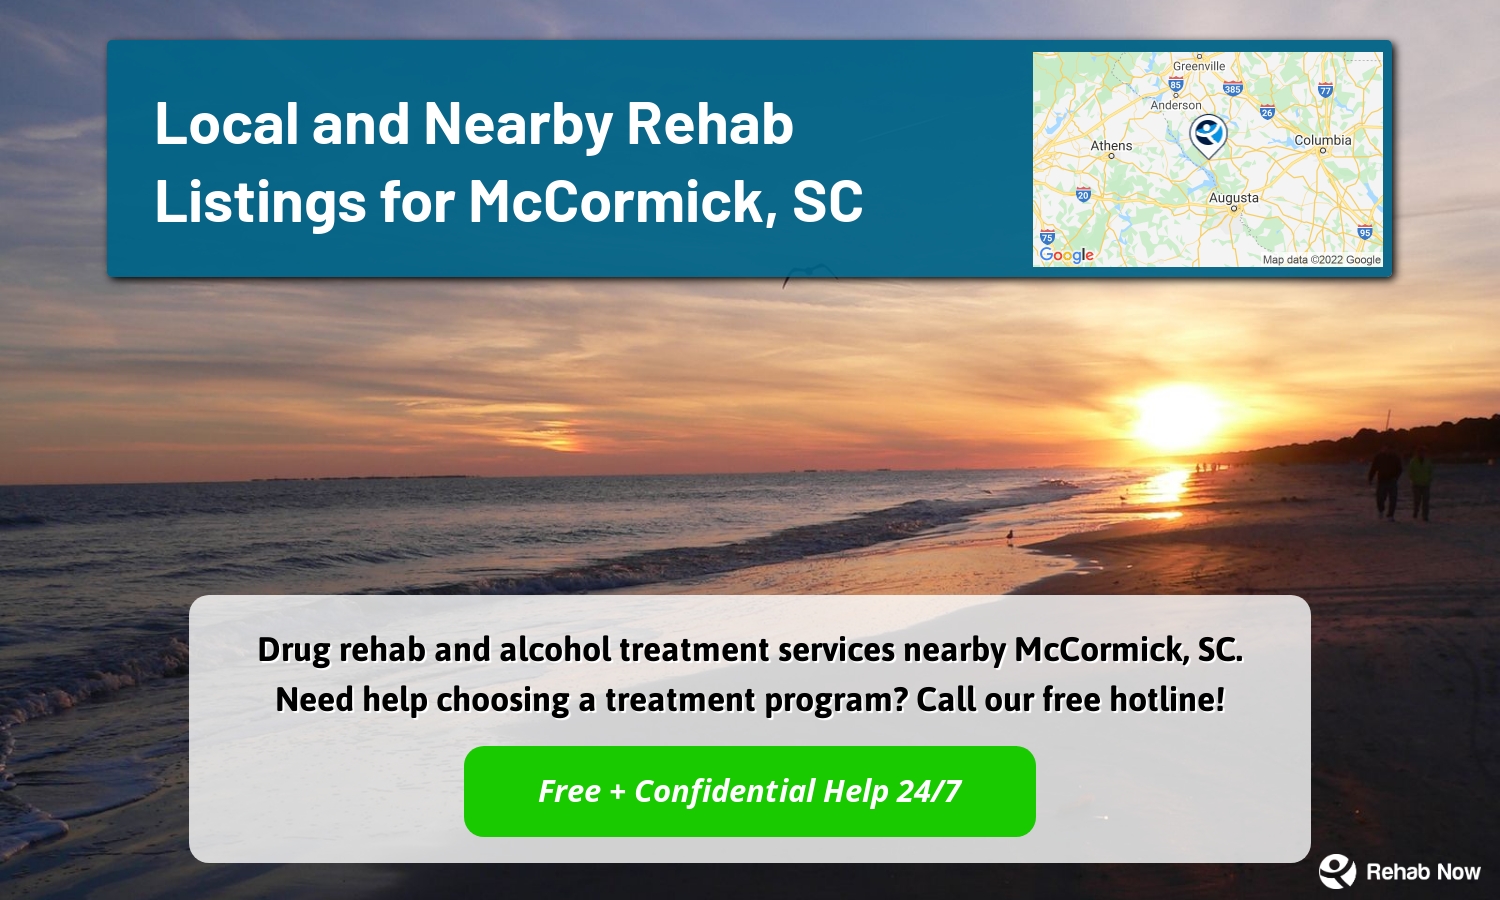 Drug rehab and alcohol treatment services nearby McCormick, SC. Need help choosing a treatment program? Call our free hotline!